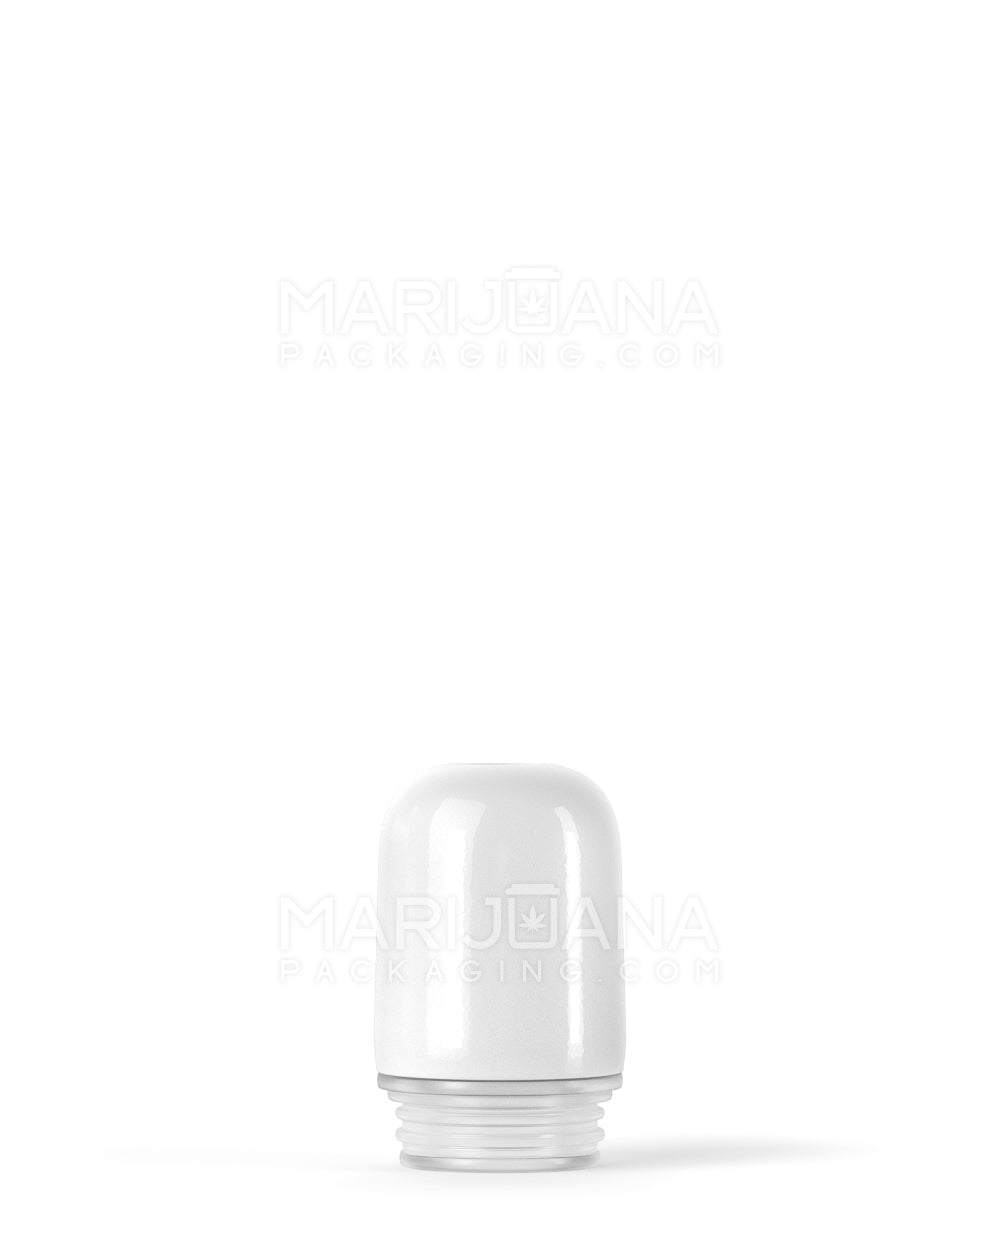 AVD | Round Vape Mouthpiece for Glass Cartridges | White Ceramic - Eazy Press - 600 Count - 2